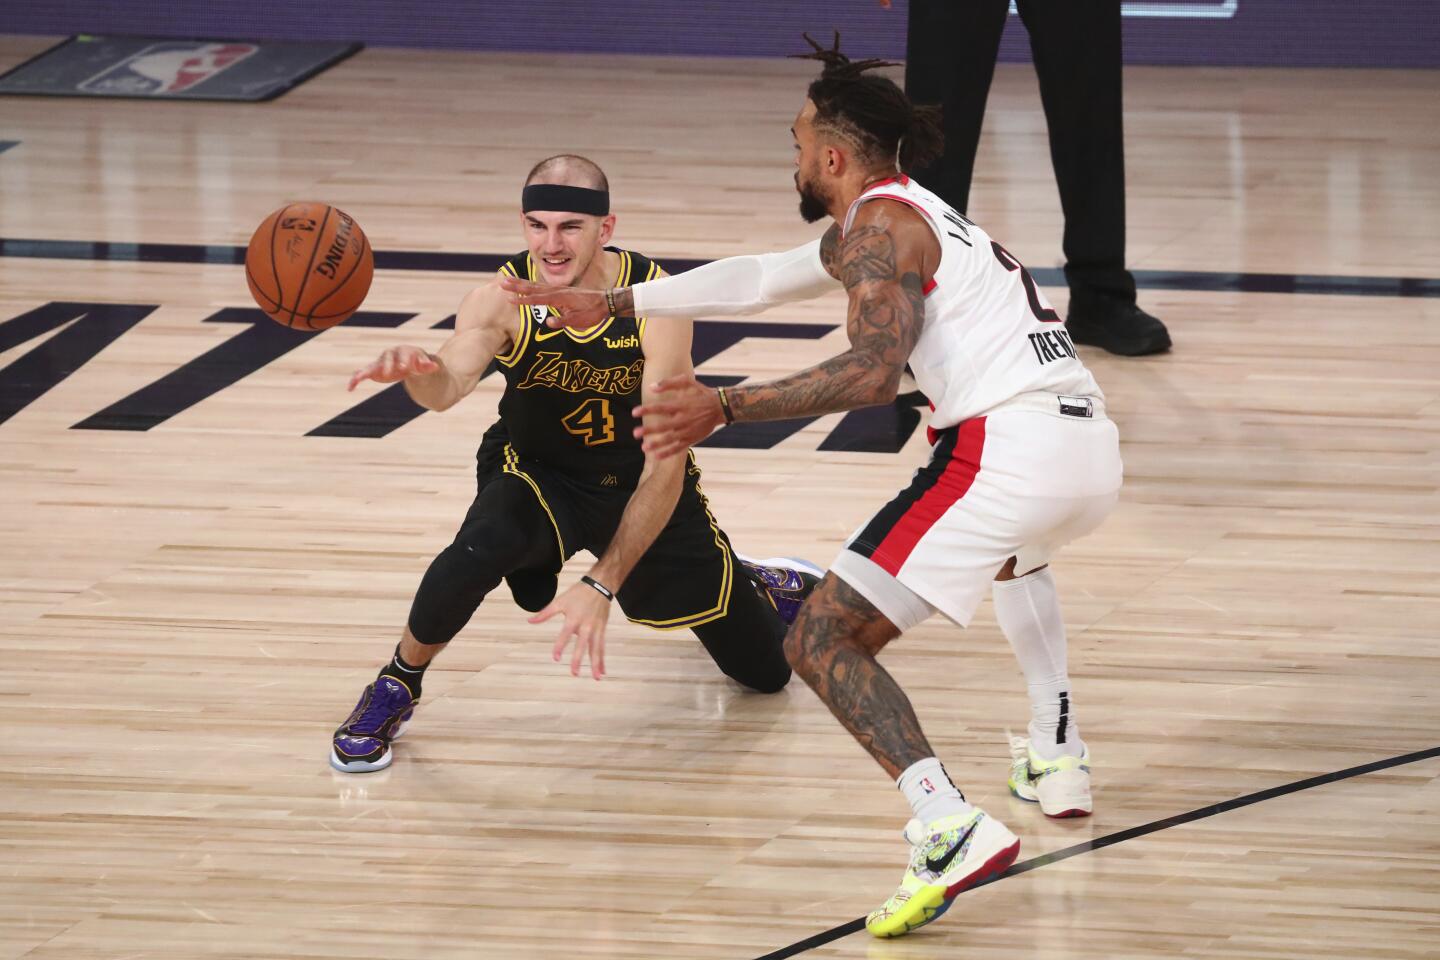 Lakers rout Blazers in Game 4 with inspiration from Kobe Bryant